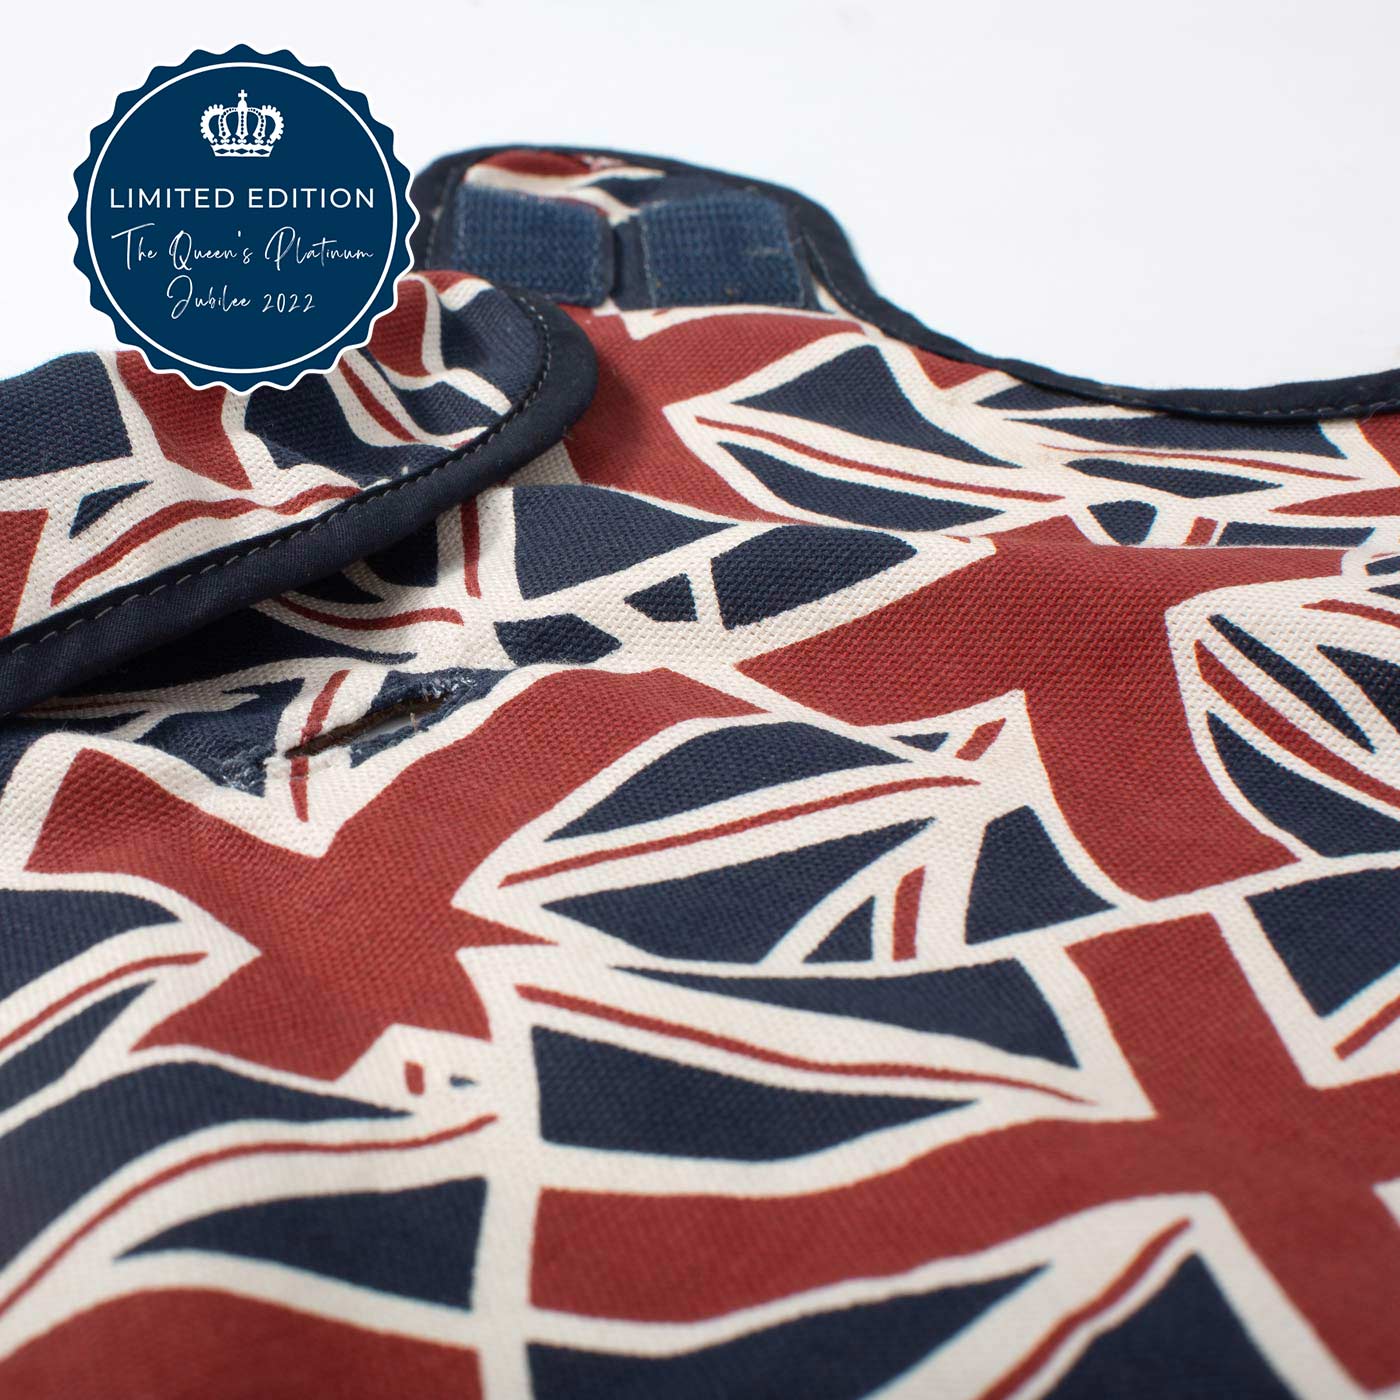 Accessorize Your Pet, With Our Stunning Dachshund Fleece, in Union Jack! Comes In five Size, And Totally Machine Washable, Available To Personalize Now at Lords & Labradors US